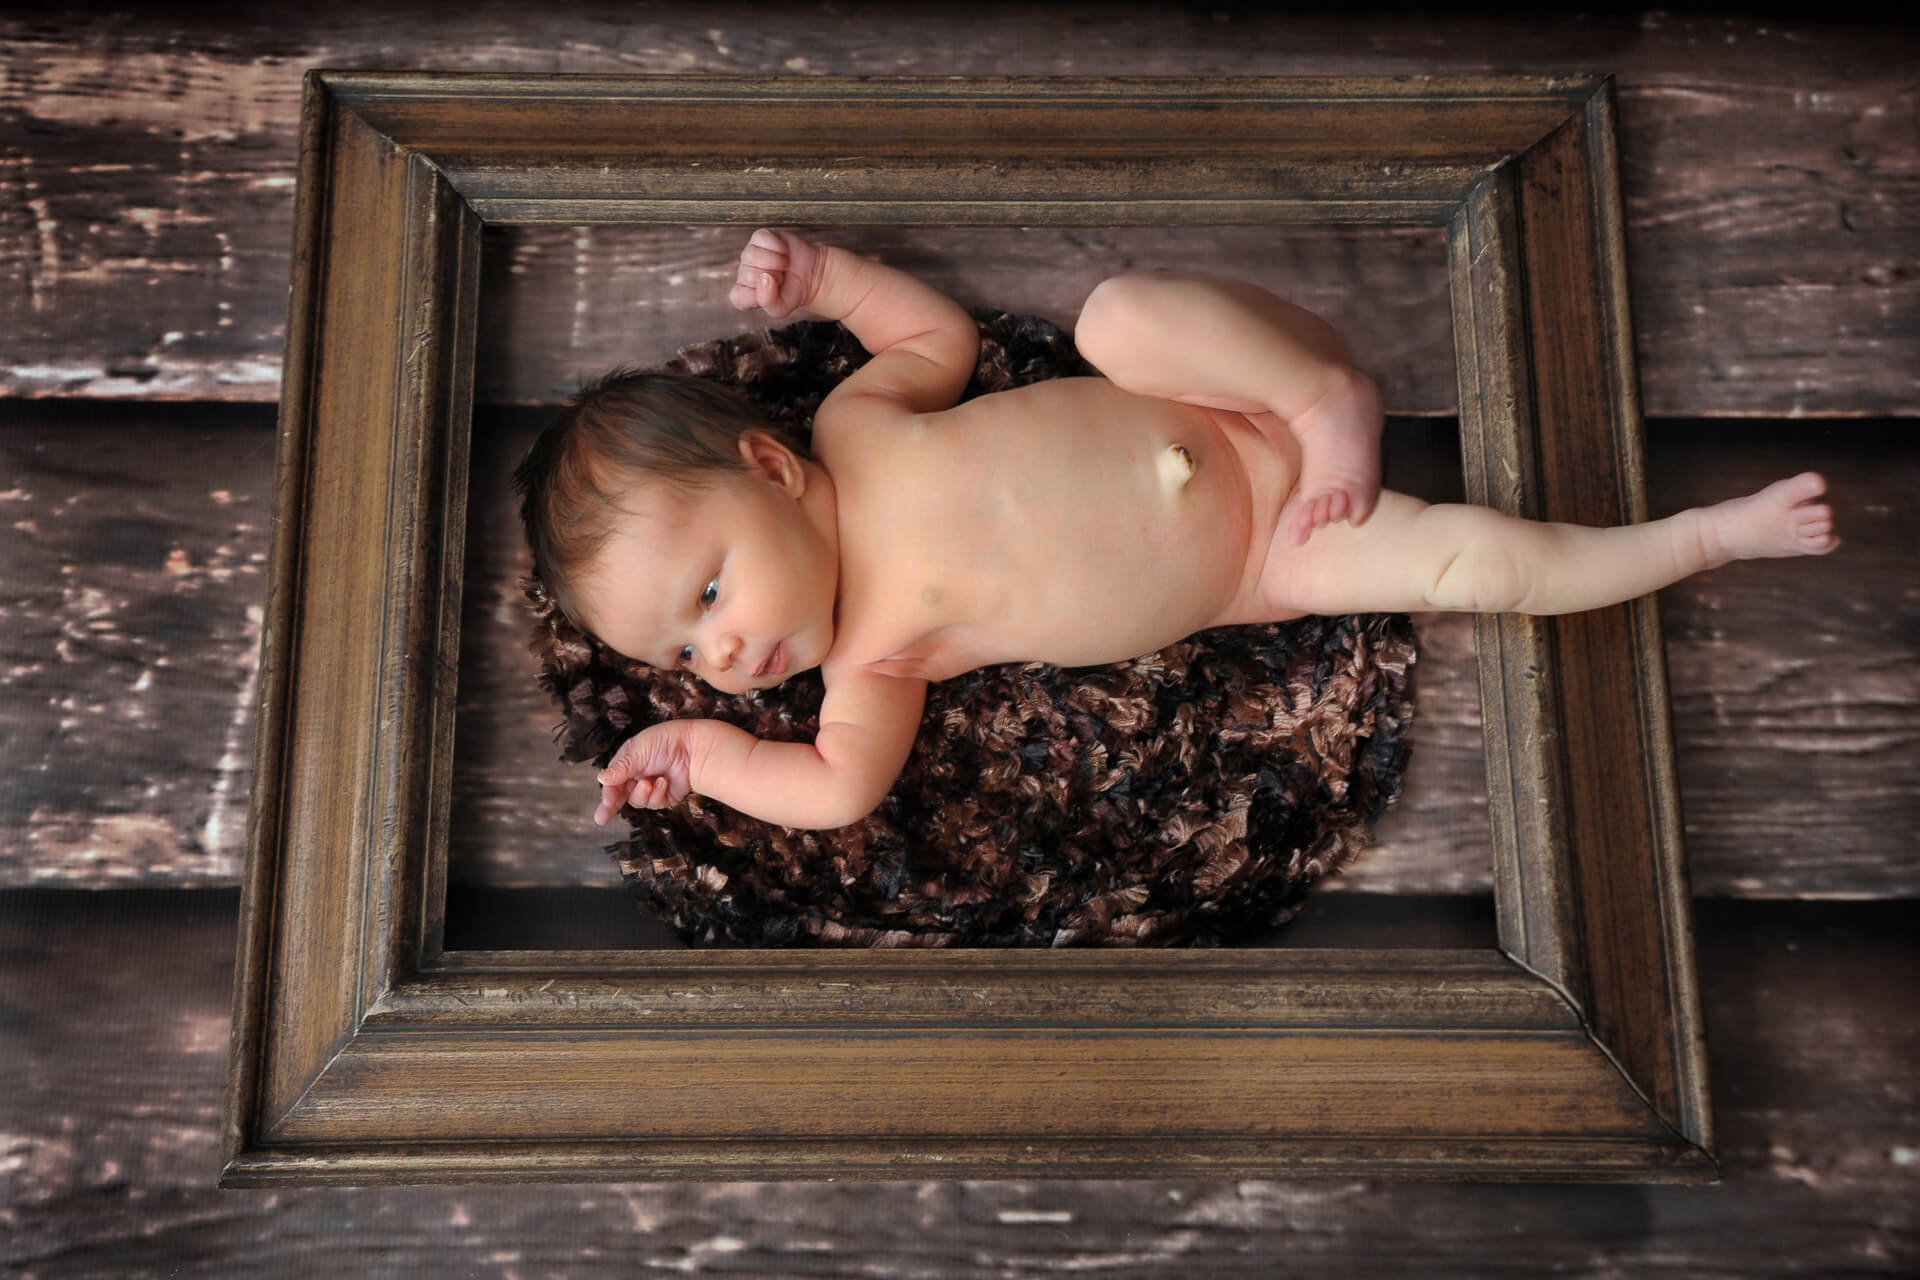 Best Detroit newborn photographer of a baby in a frame doing a pose much like the ceiling of the Sistine Chapel, except this is in metro Detroit, Michigan at my studio.